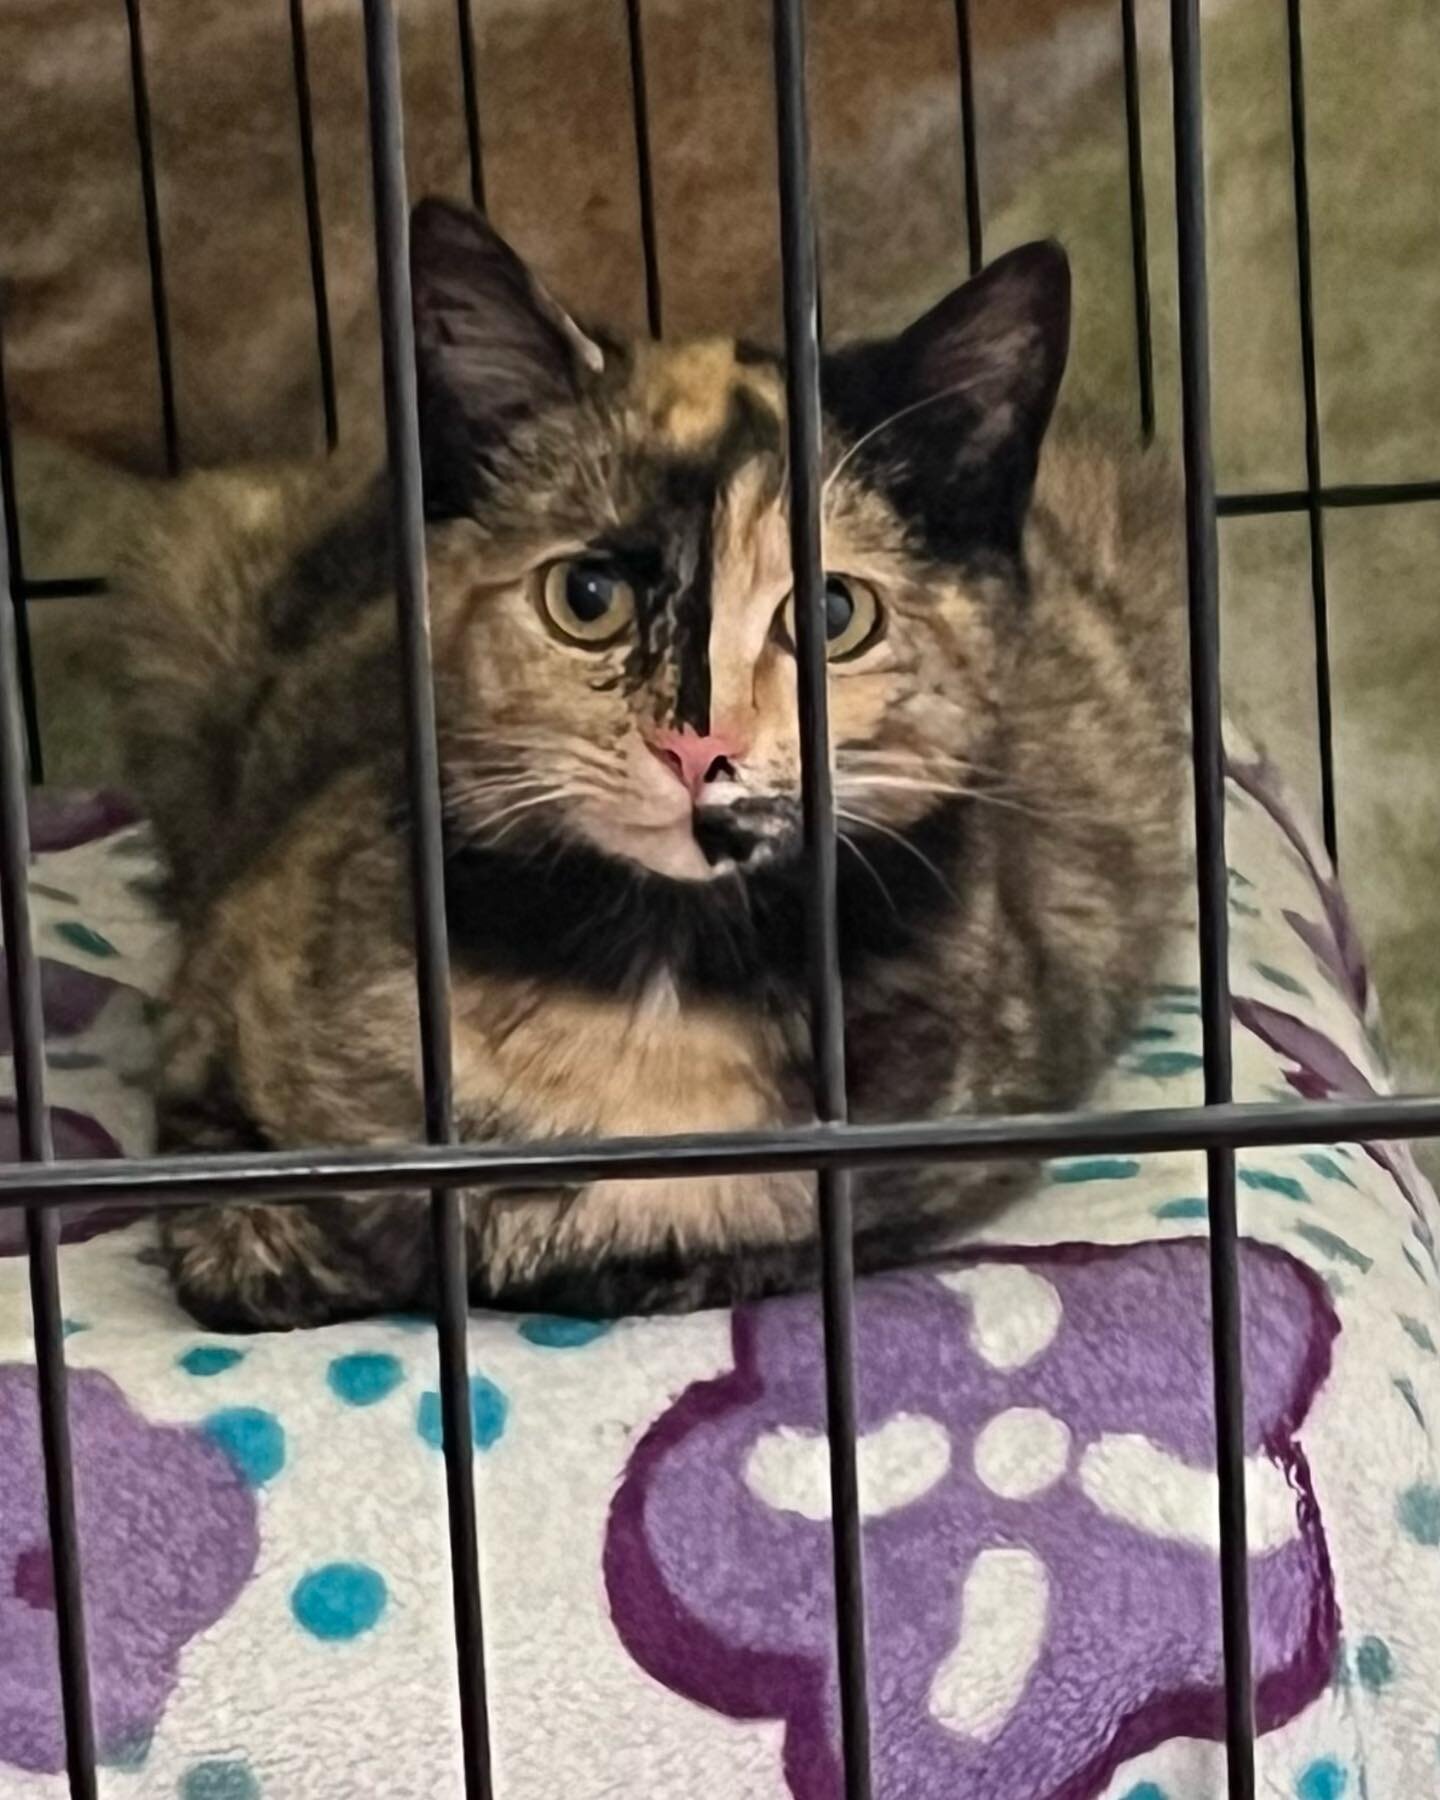 This sweet girl came to us yesterday after she was found by new home owners abandoned and pregnant. She will have a sage and warm place to have her kittens and we will work to find them all amazing homes. Please help us help them by donating at www.j